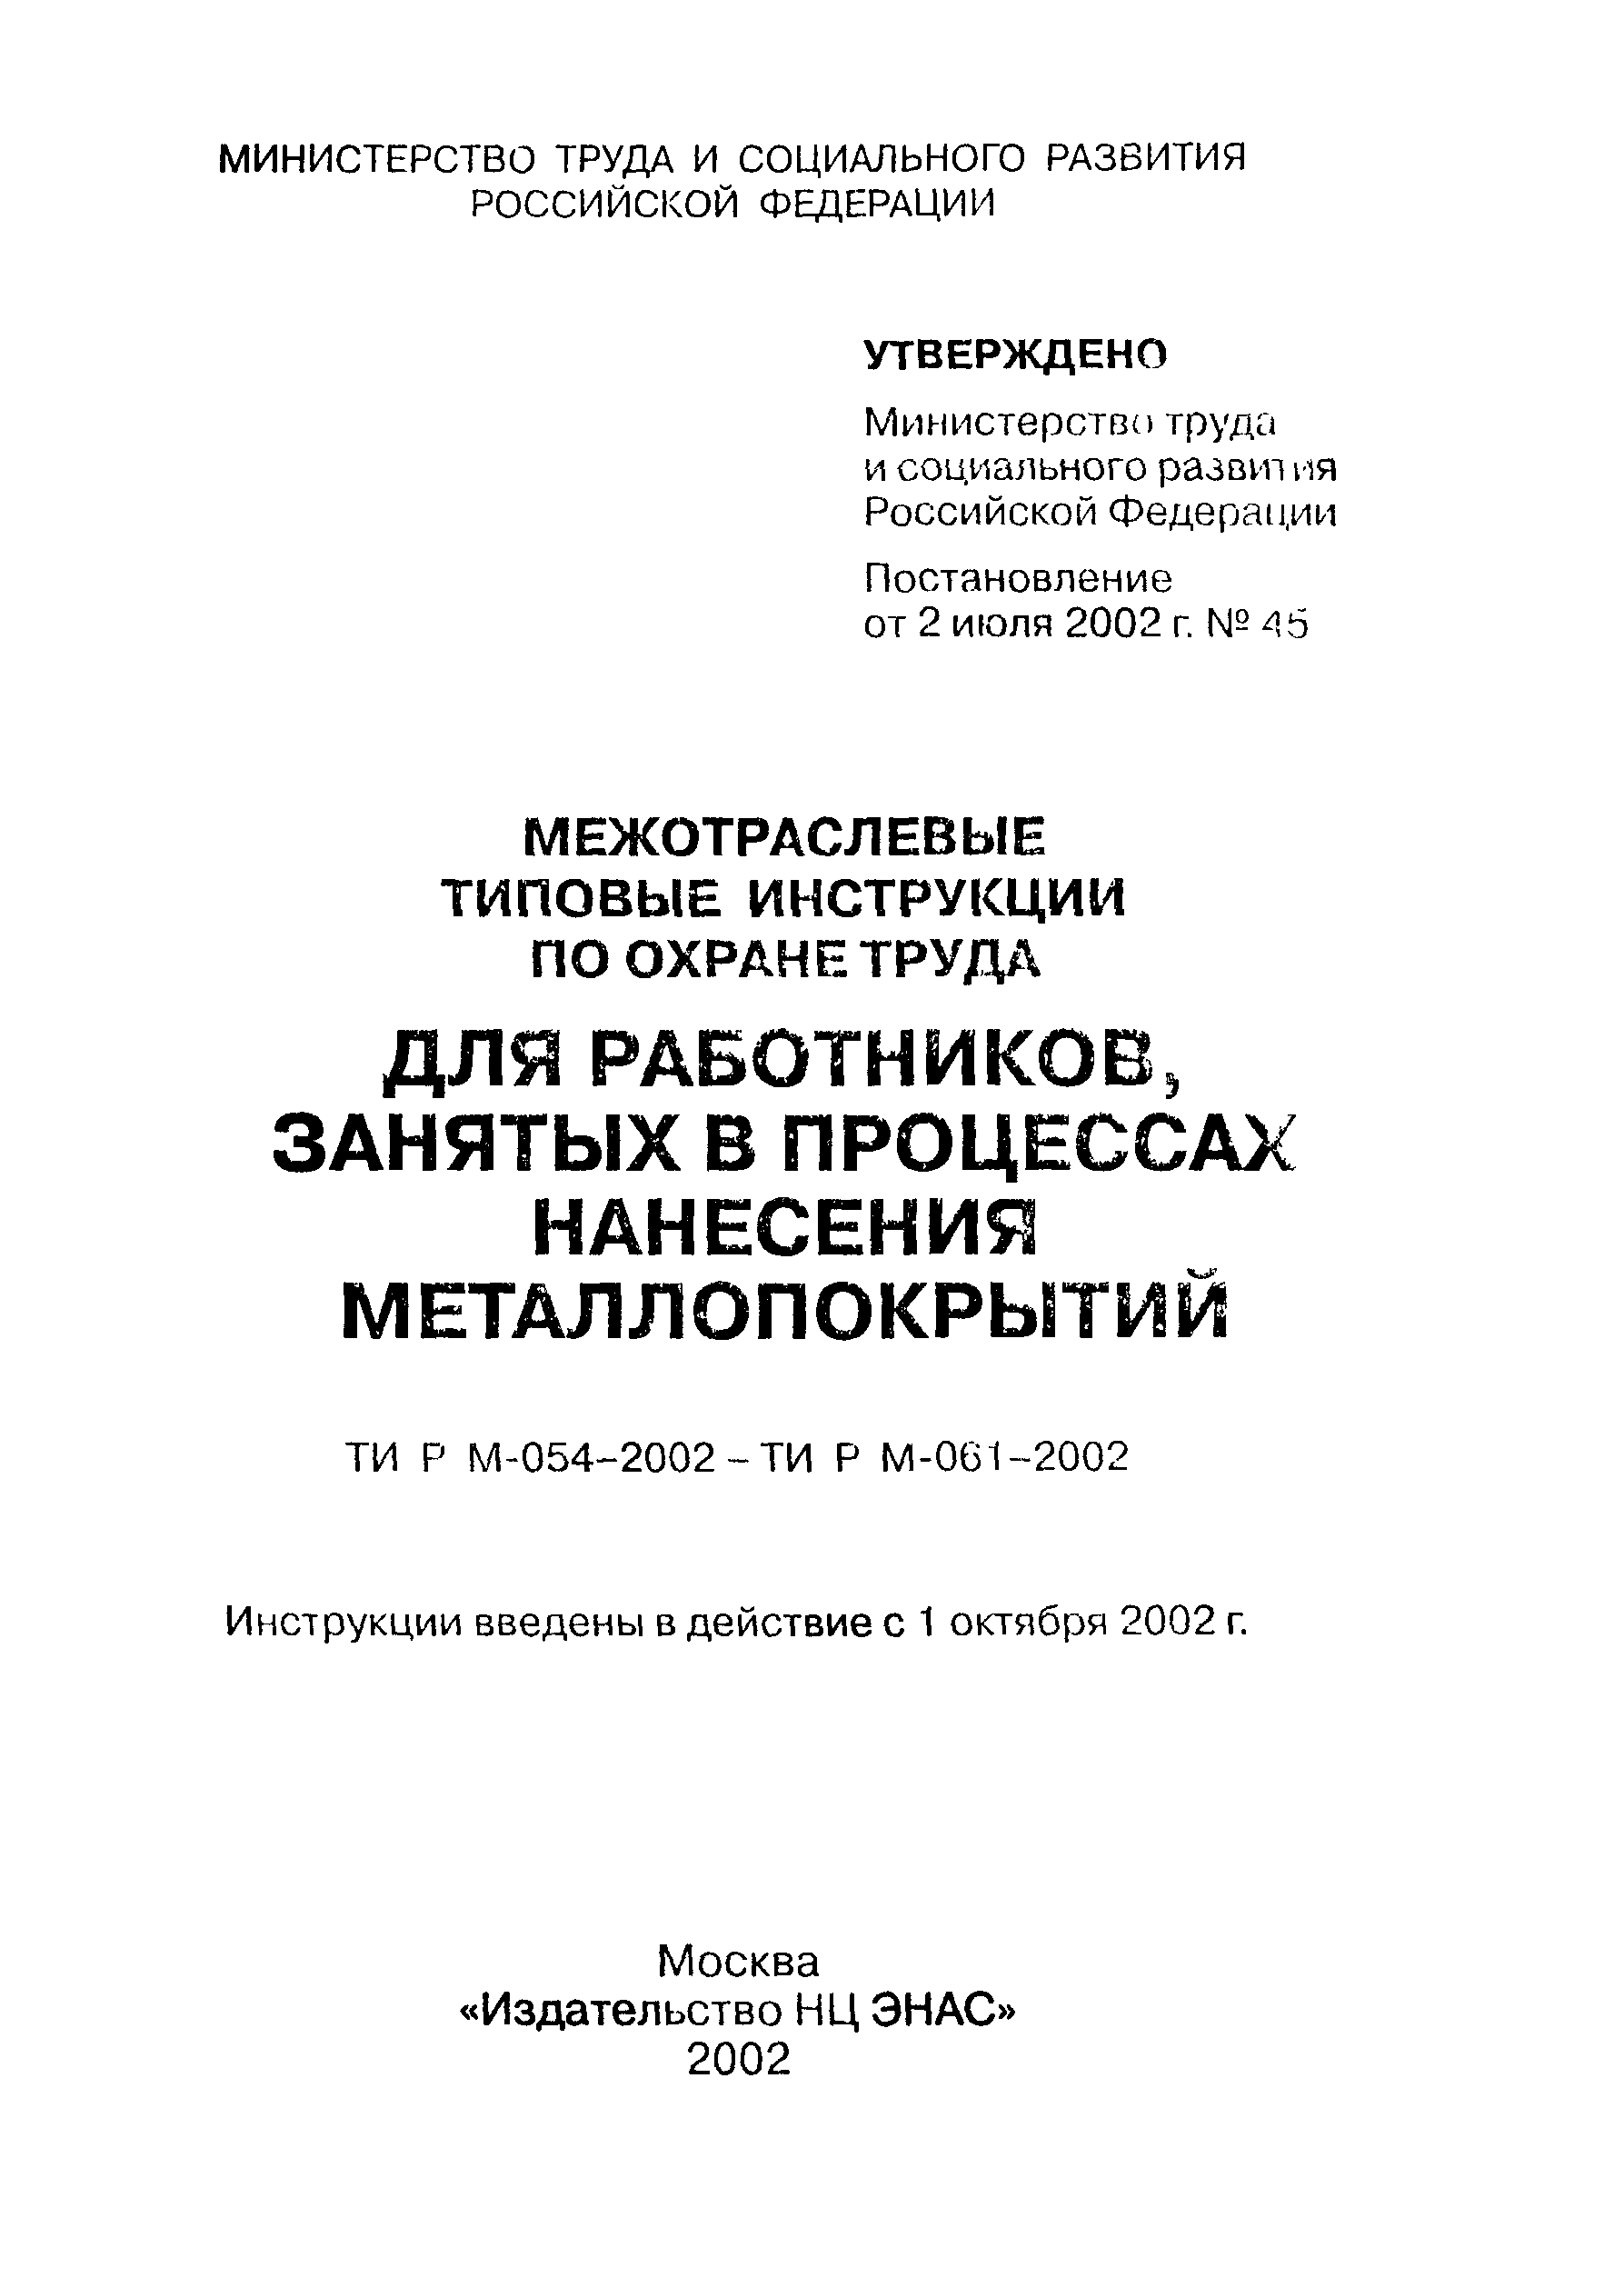 ТИ Р М-055-2002